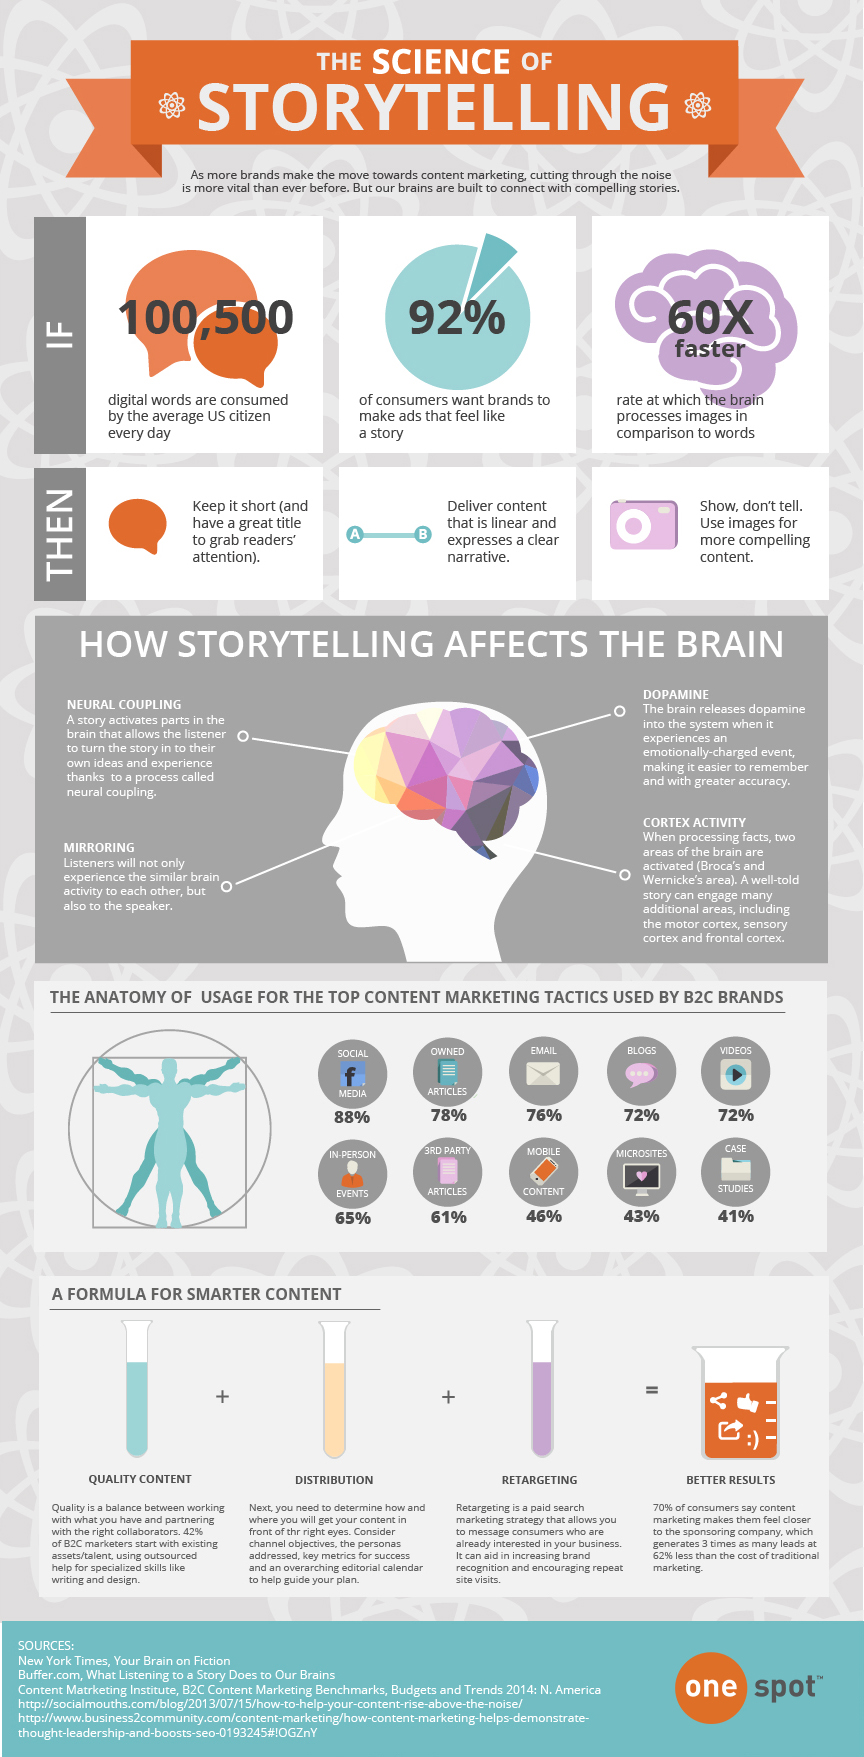 The Science of Storytelling Visually Explained